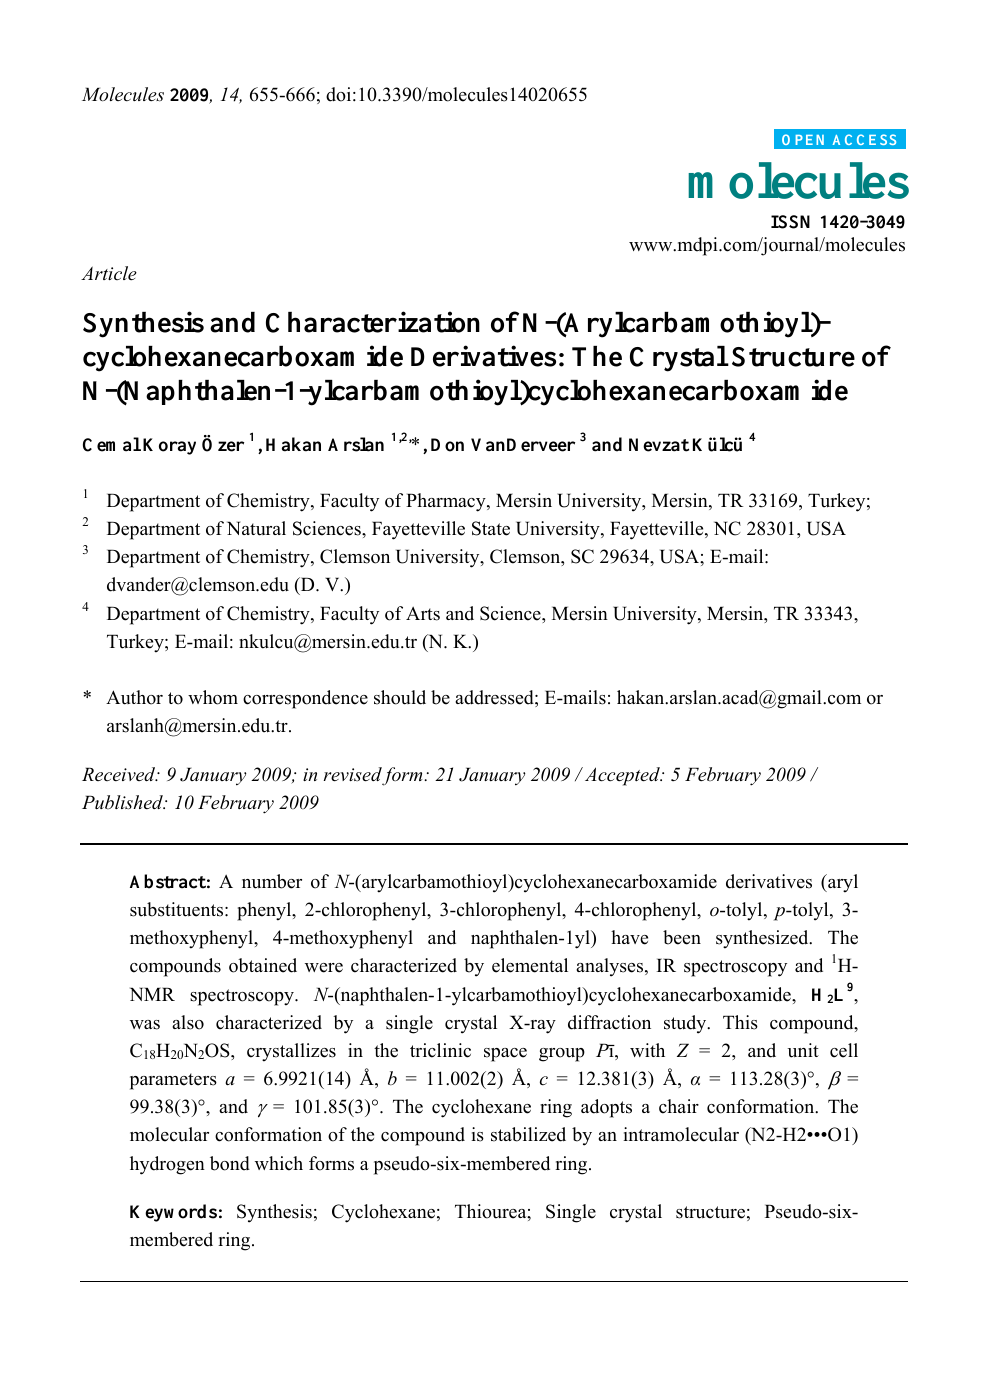 Synthesis And Characterization Of N Arylcarbamothioyl Cyclohexanecarboxamide Derivatives The Crystal Structure Of N Naphthalen 1 Ylcarbamothioyl Cyclohexanecarboxamide Topic Of Research Paper In Chemical Sciences Download Scholarly Article Pdf